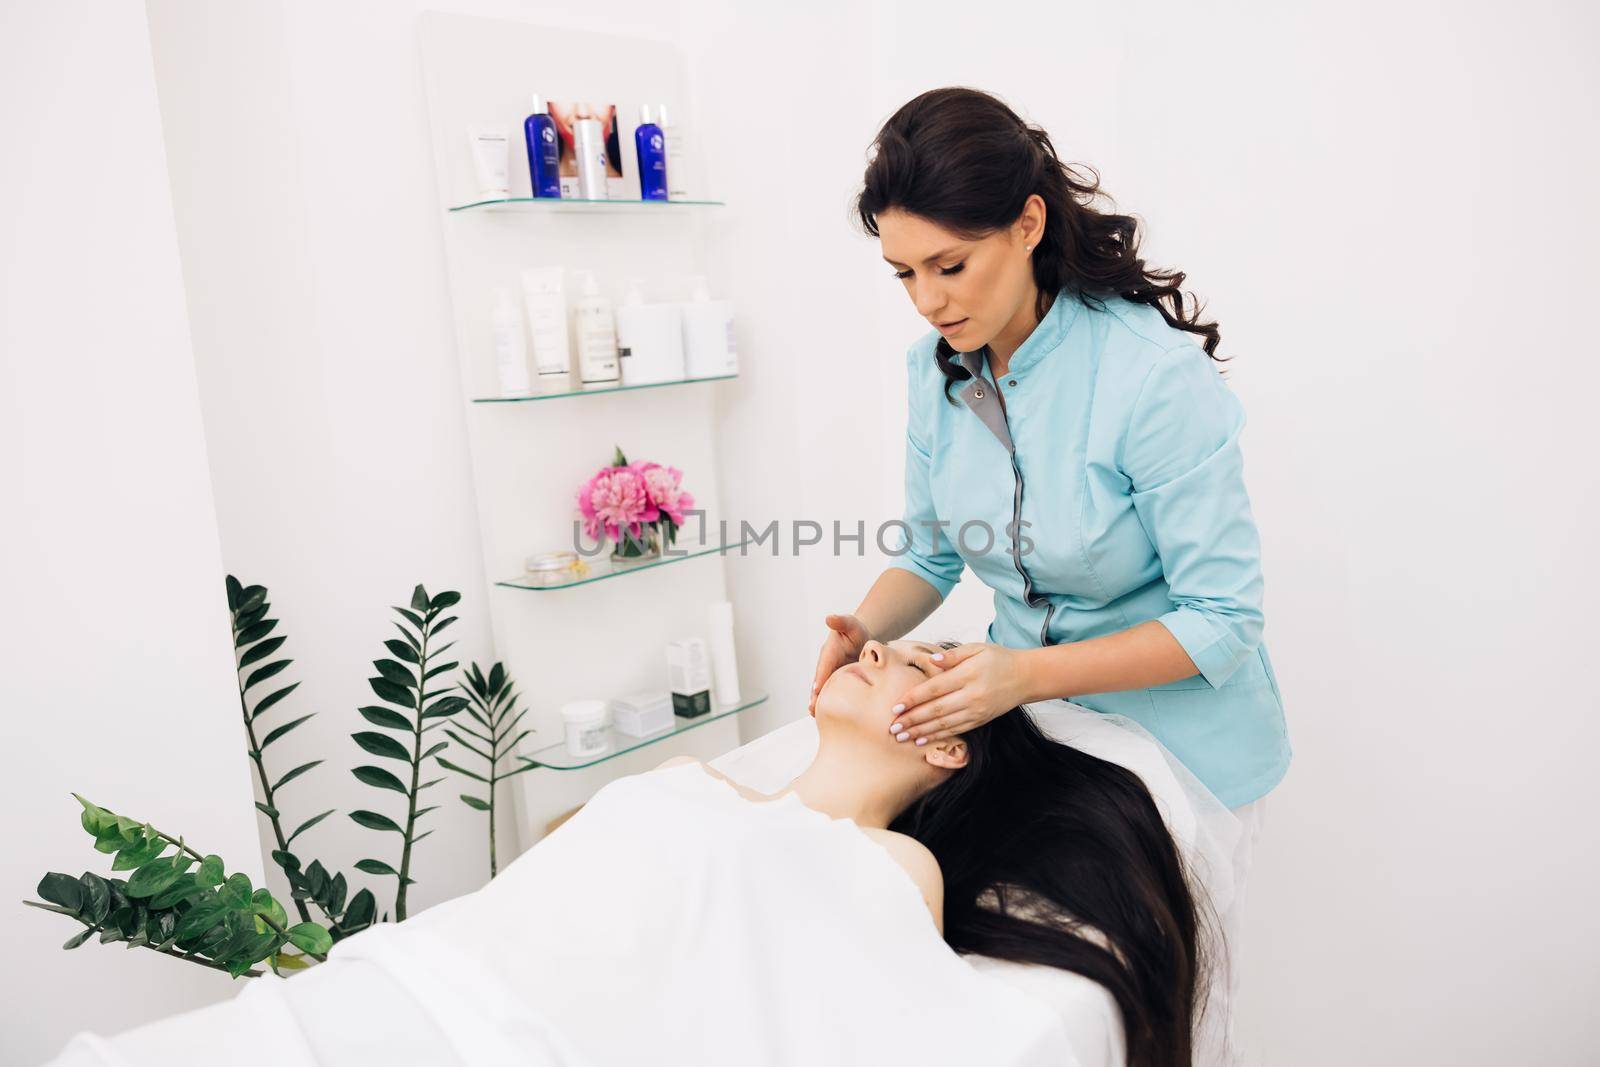 Young woman having massage by a female masseur in blue medical pijama at modern health center. Wellness health concept. Woman relaxing during massage lying on massage table by uflypro